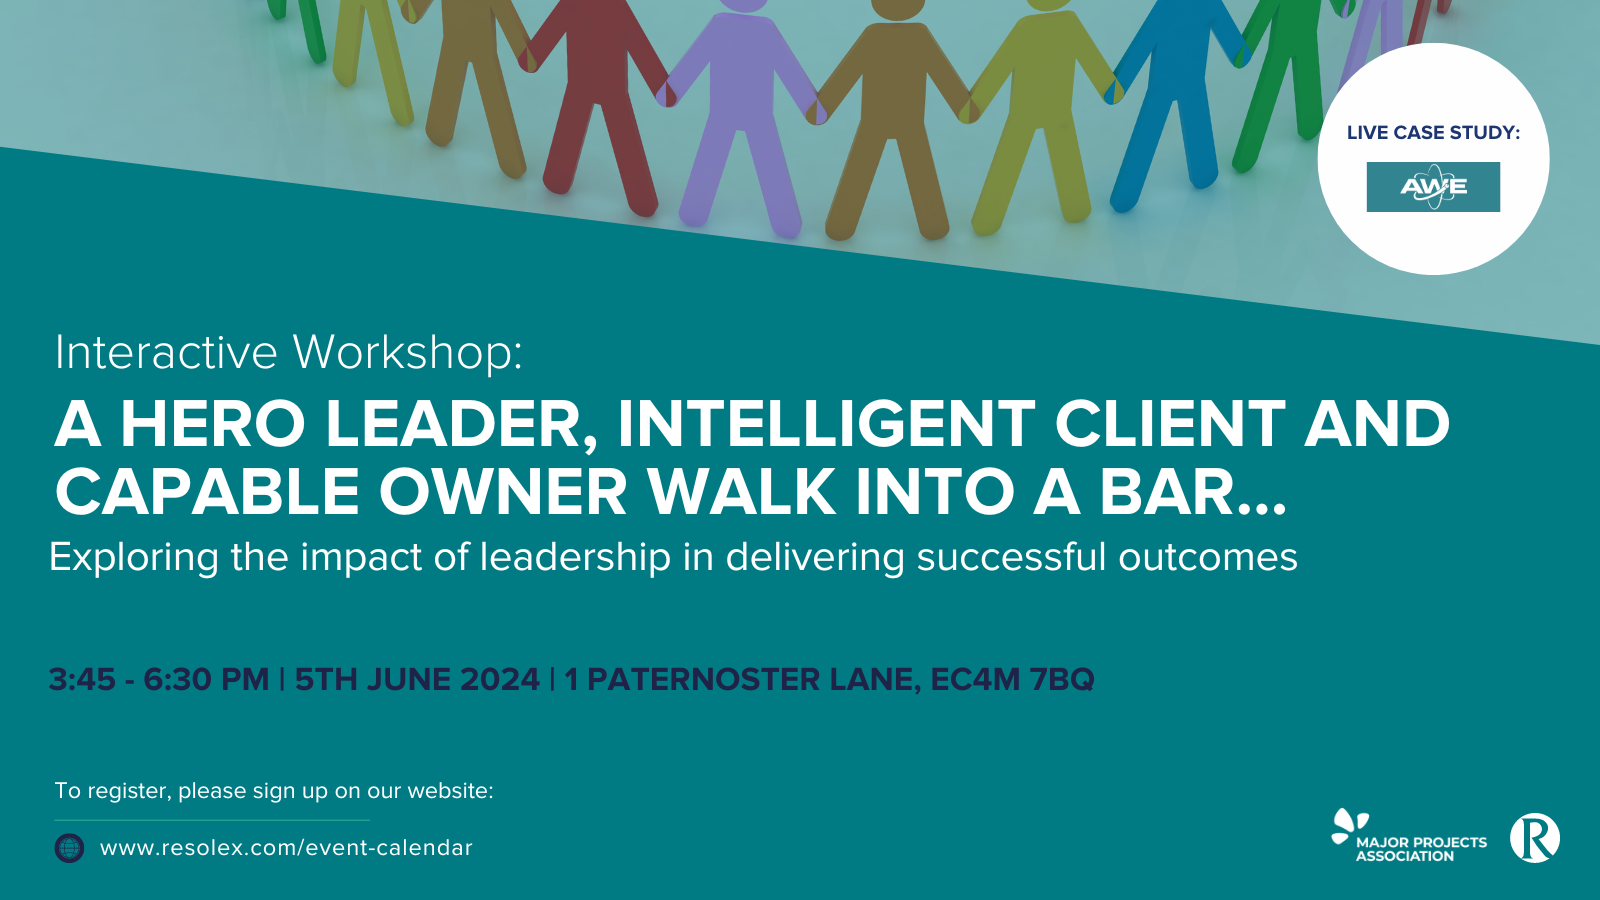 Interactive workshop: A hero leader, Intelligent Client and Capable Owner walk into a bar